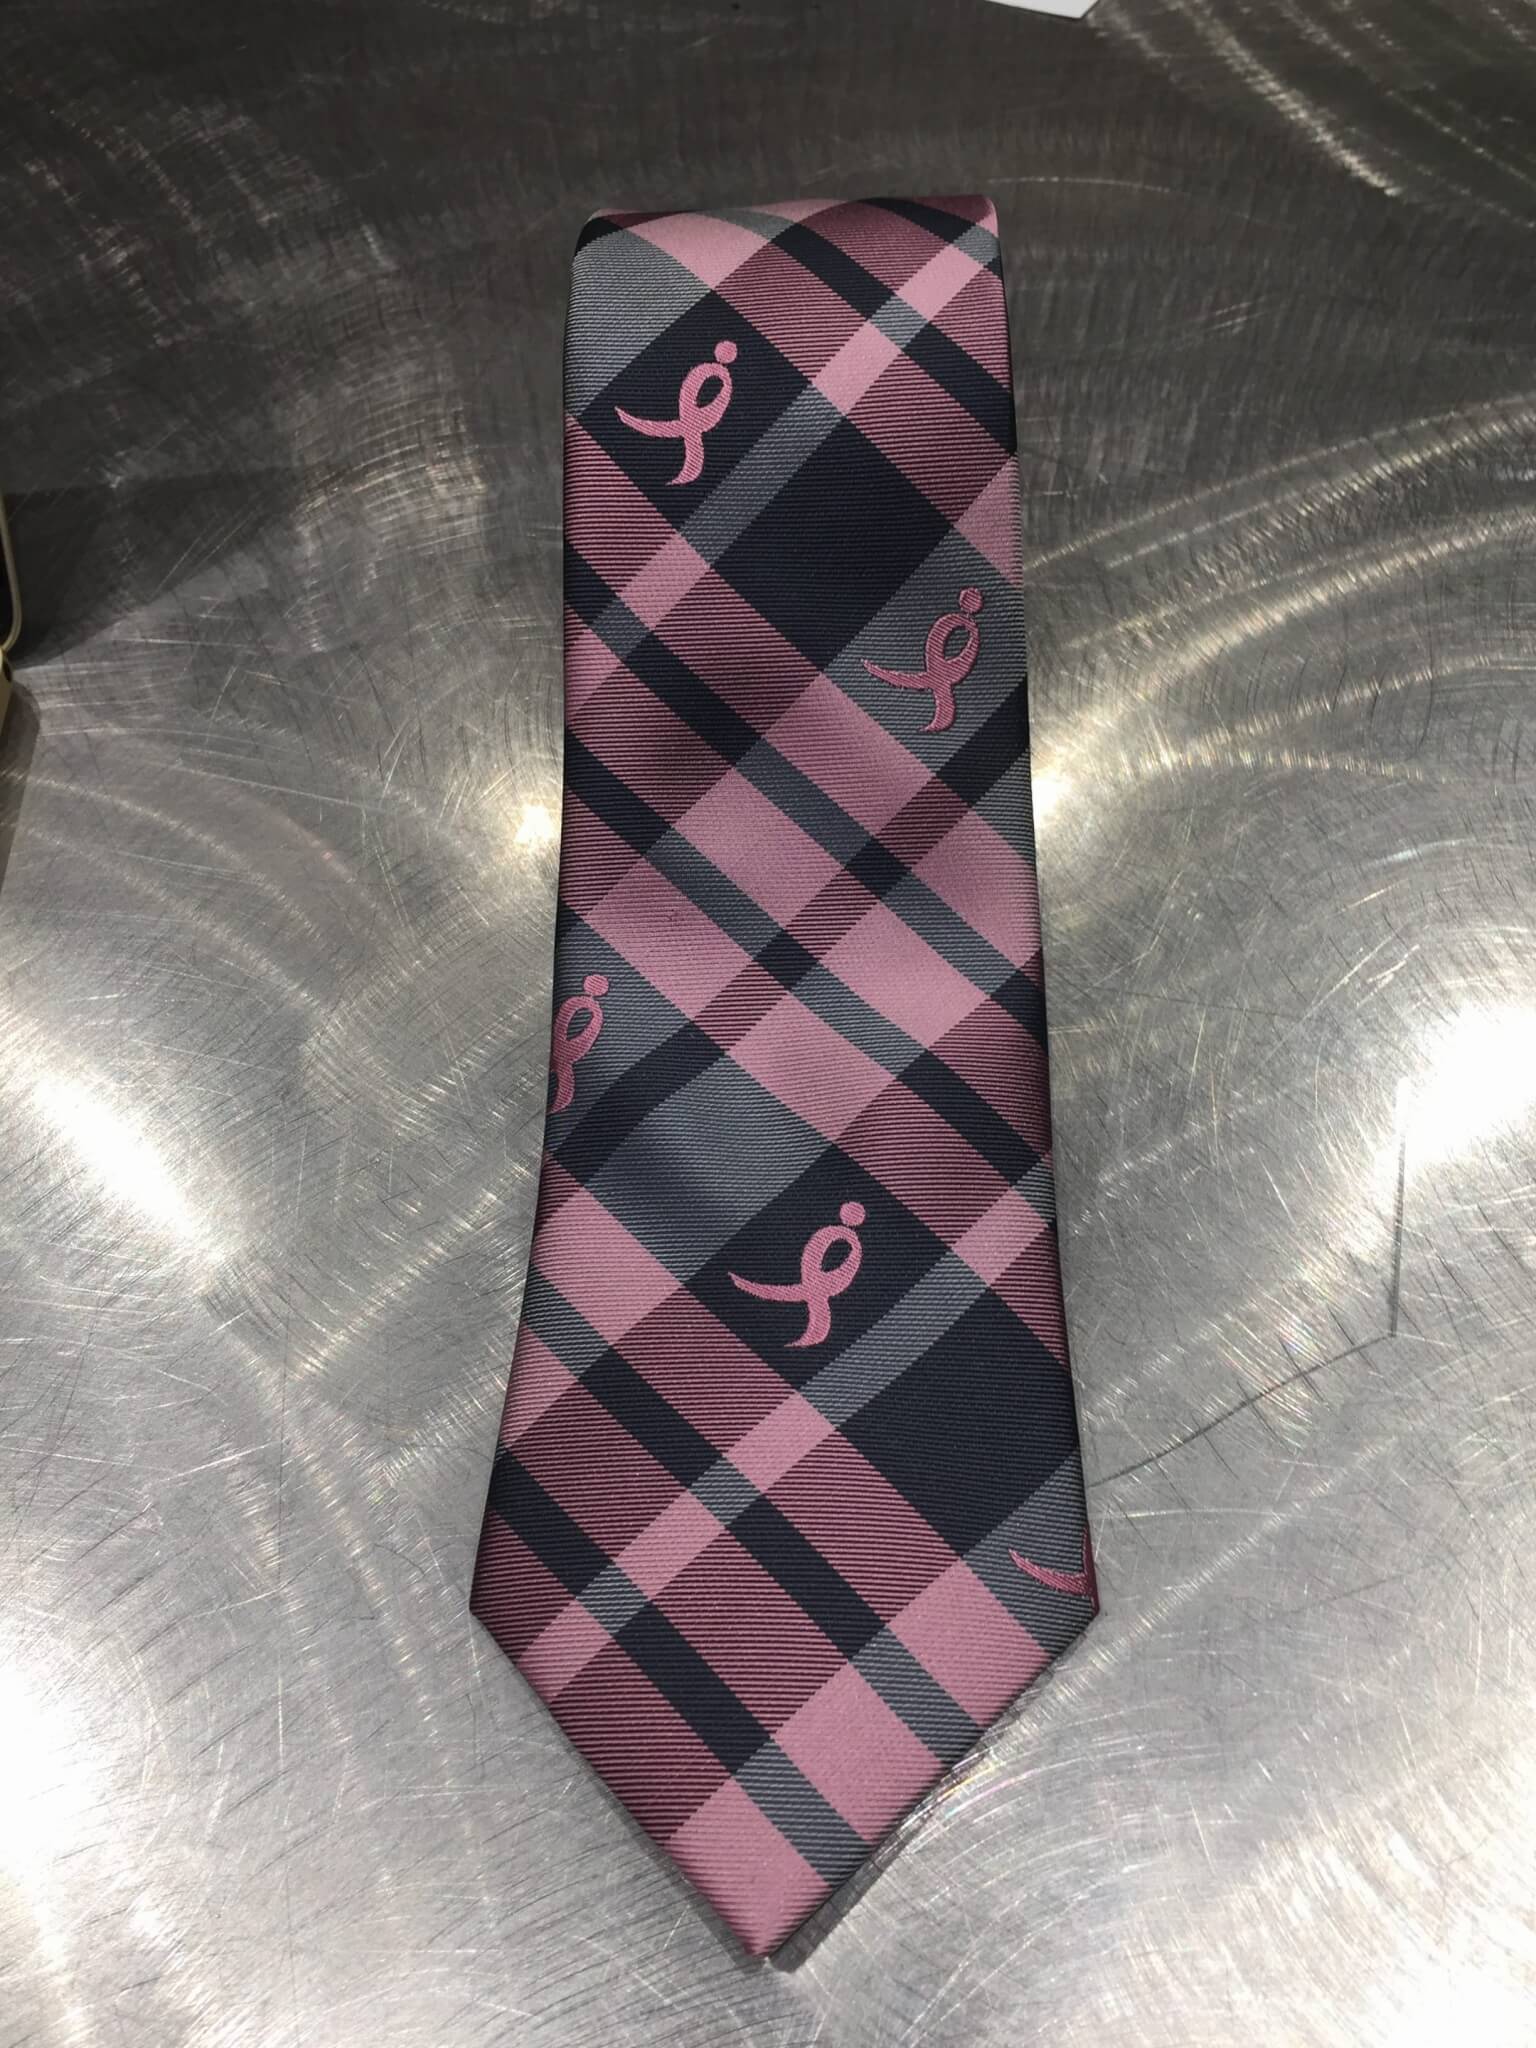 5th Annual Pink Tie Guy Event – Sept 27